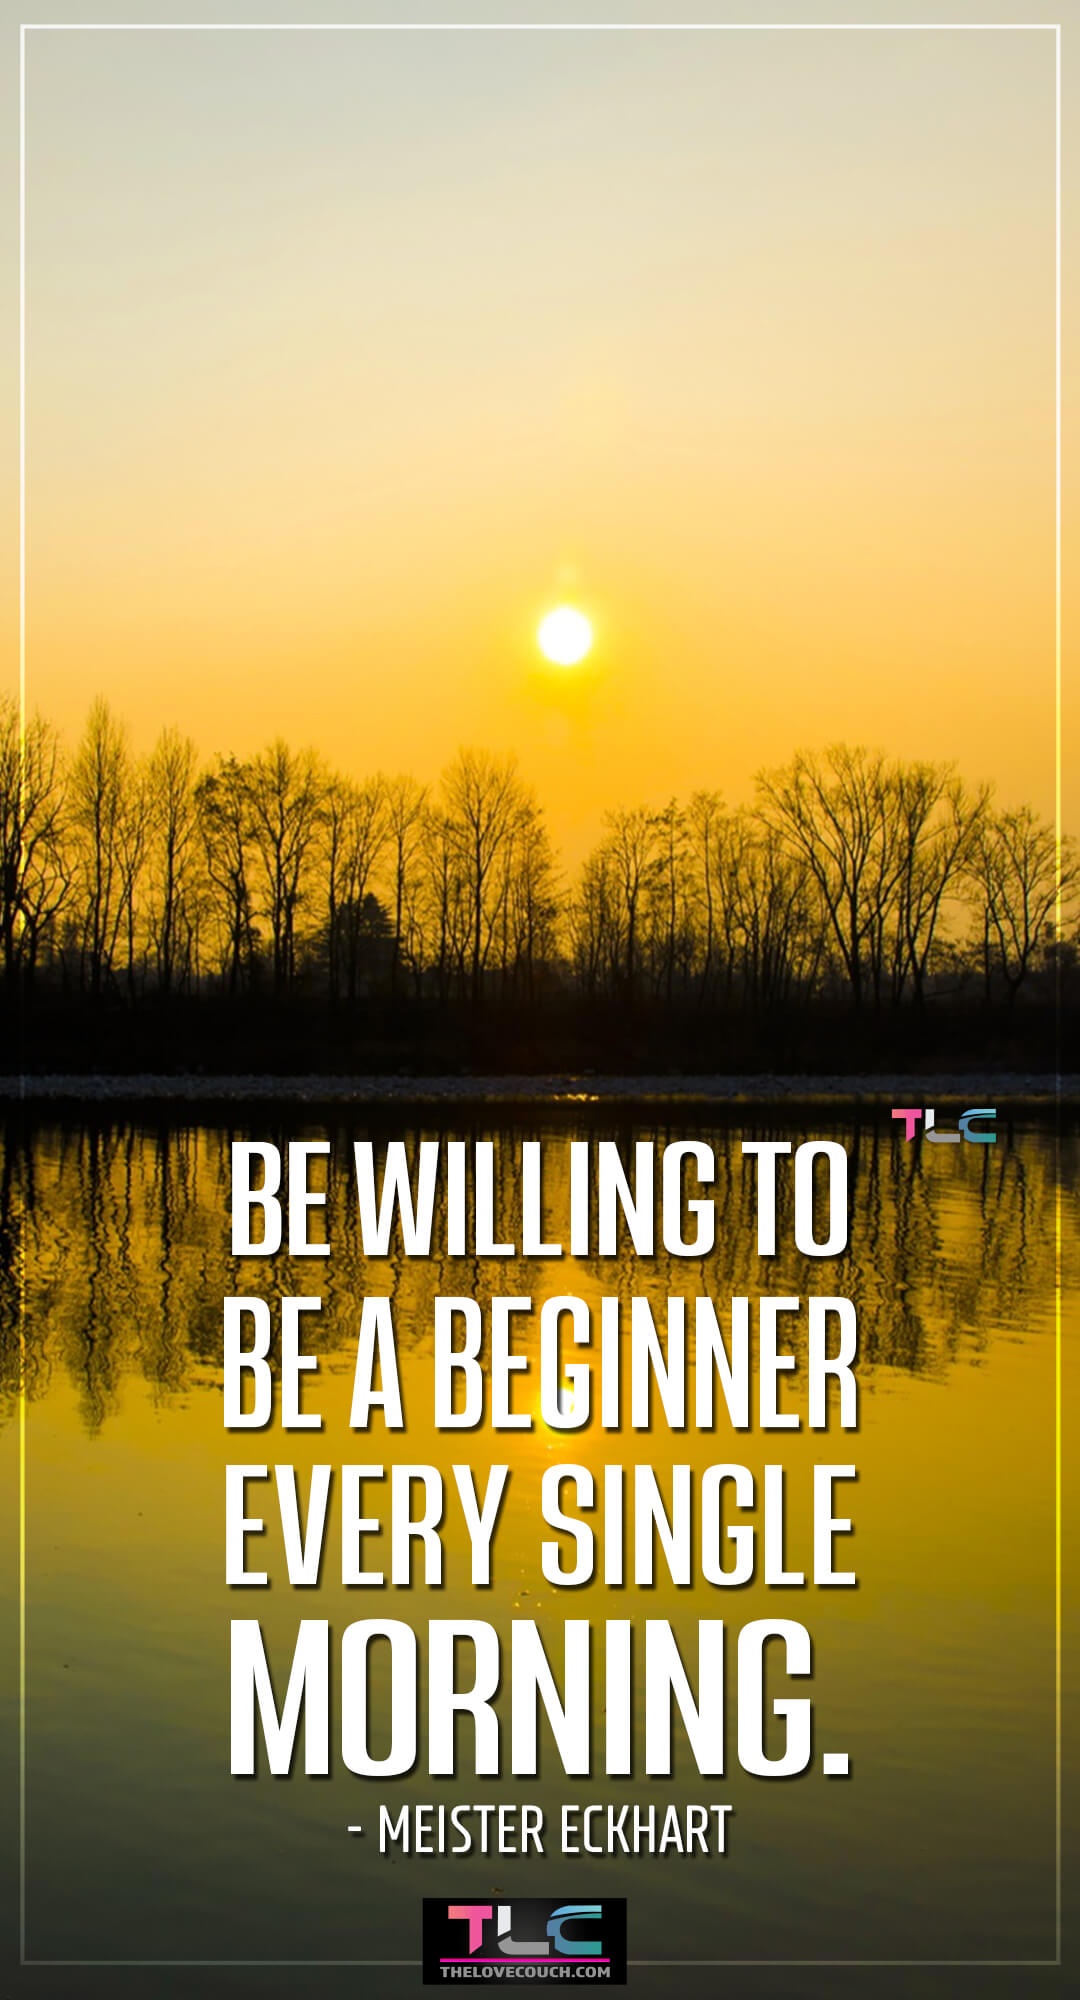 Be willing to be a beginner every single morning. - Meister Eckhart